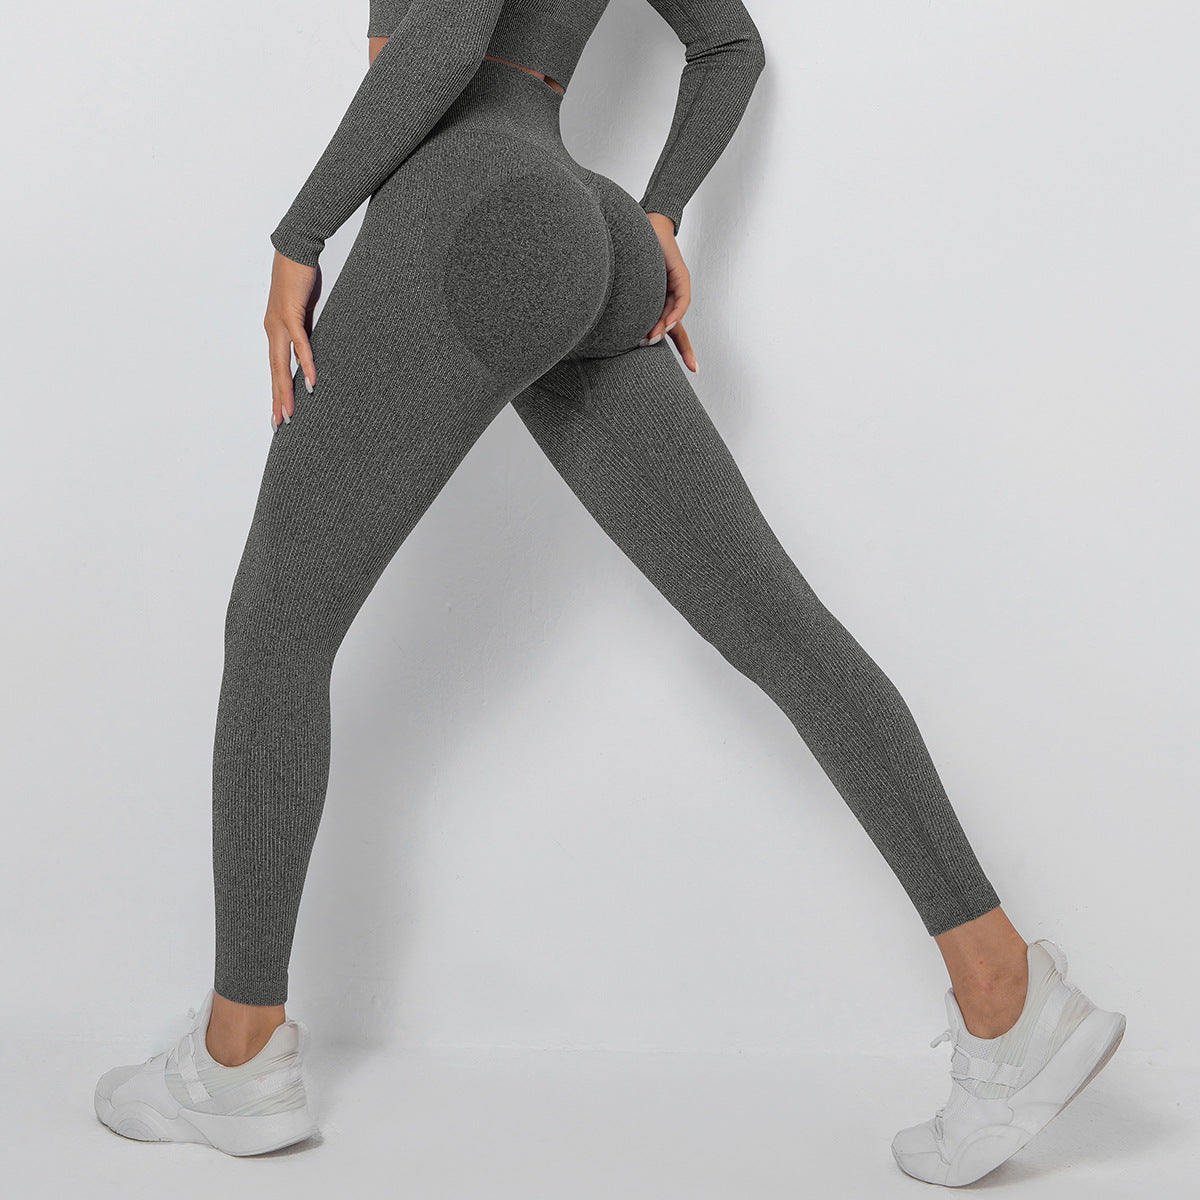 Seamless Knitted Thread Moisture Wicking Yoga Pants Exercise Workout Pants Sexy Peach Hip Tight Leggings